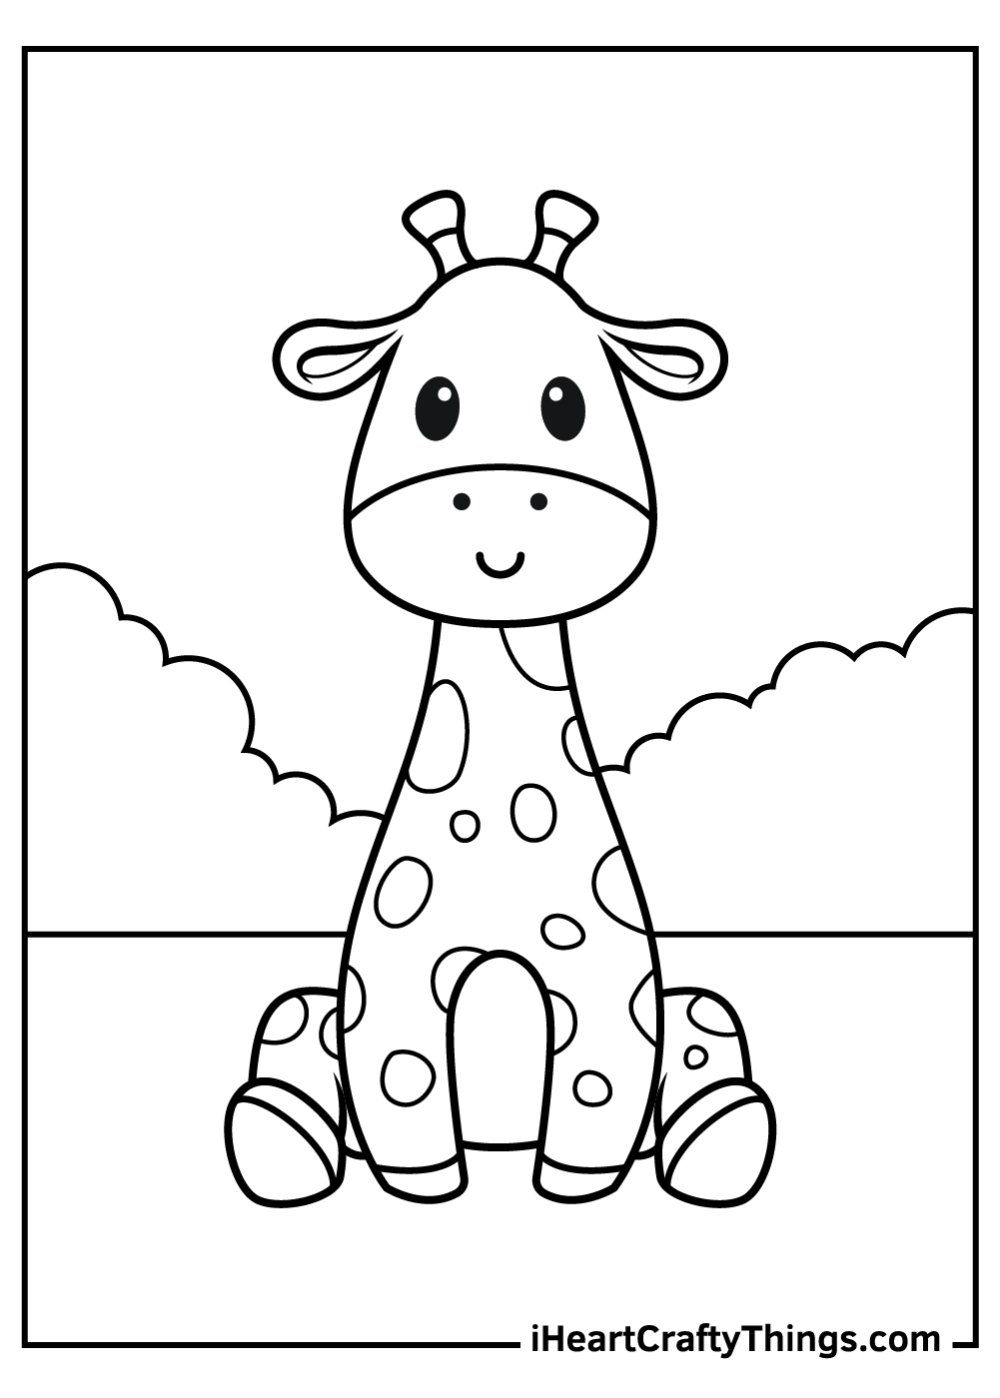 Printables zoo animal coloring pages animal coloring books animal coloring pages